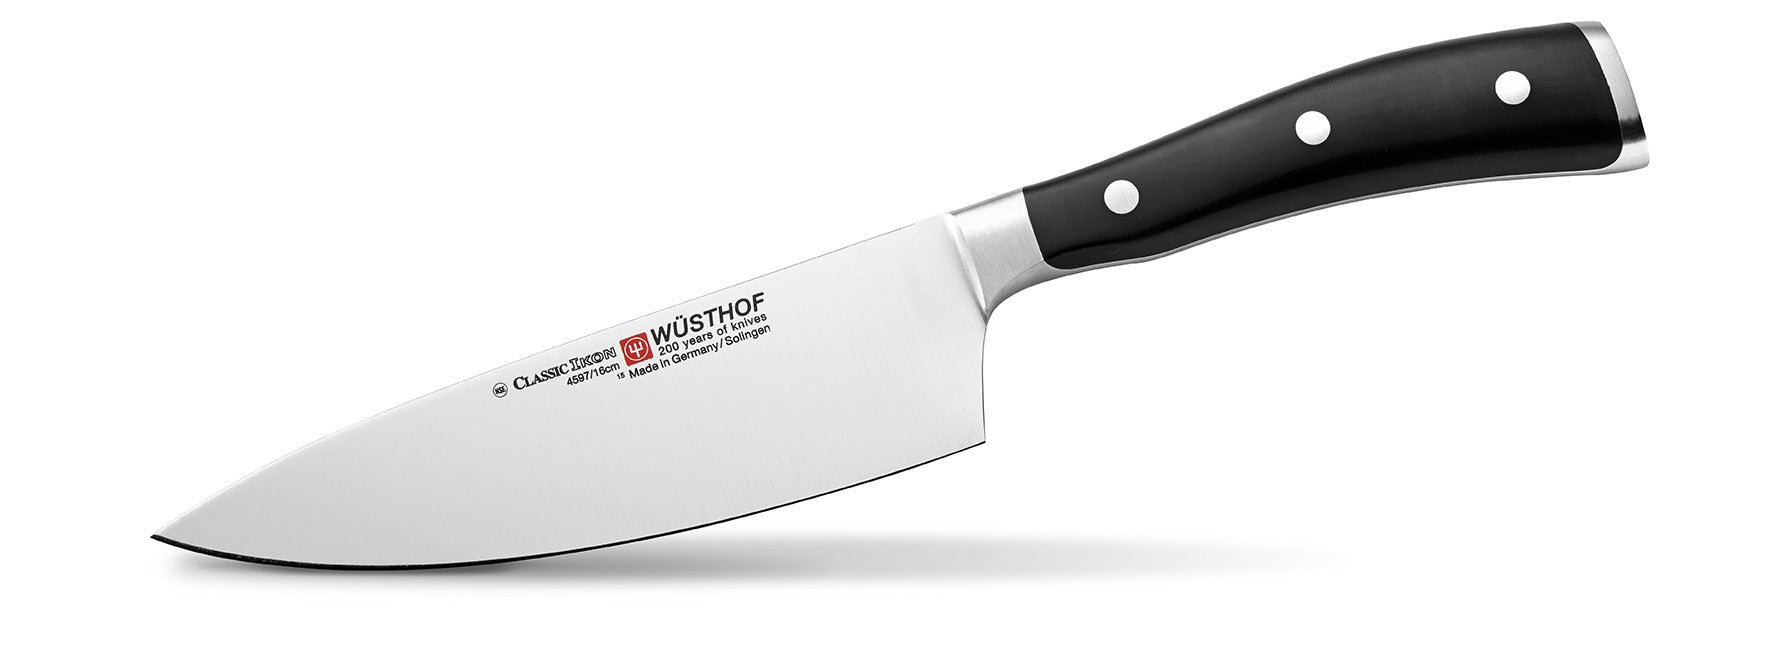 Wusthof Classic Ikon 6 Inch Extra Wide Cook’s Knife